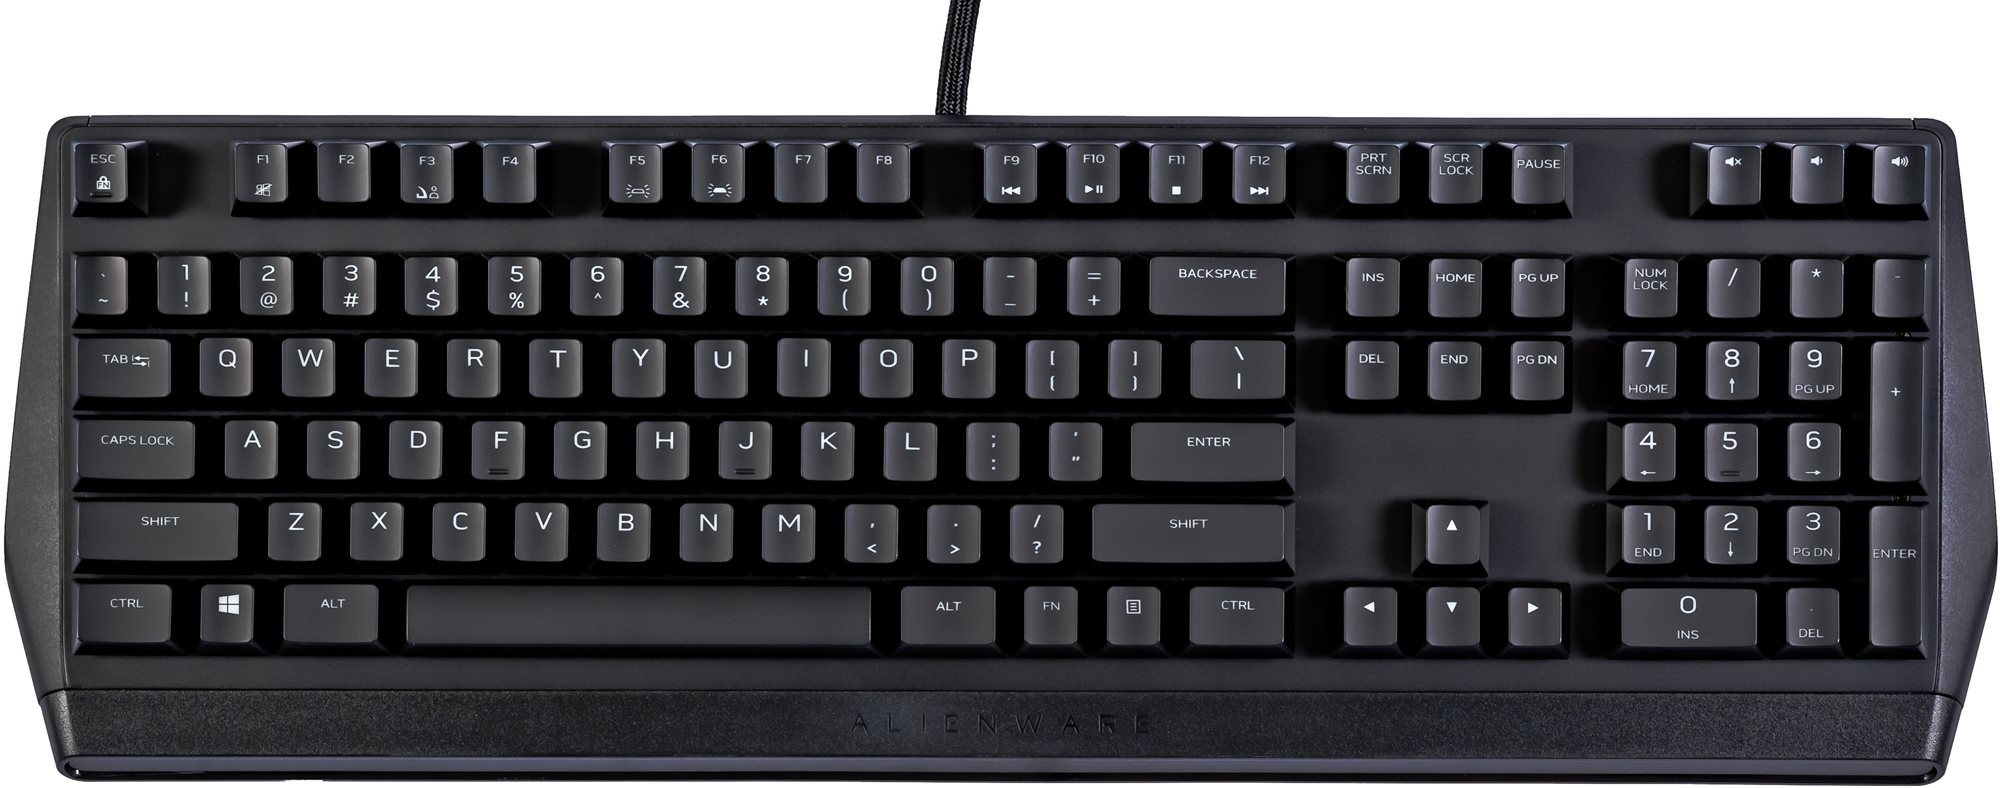 Dell Alienware AW310K Mechanical Gaming Keyboard - US